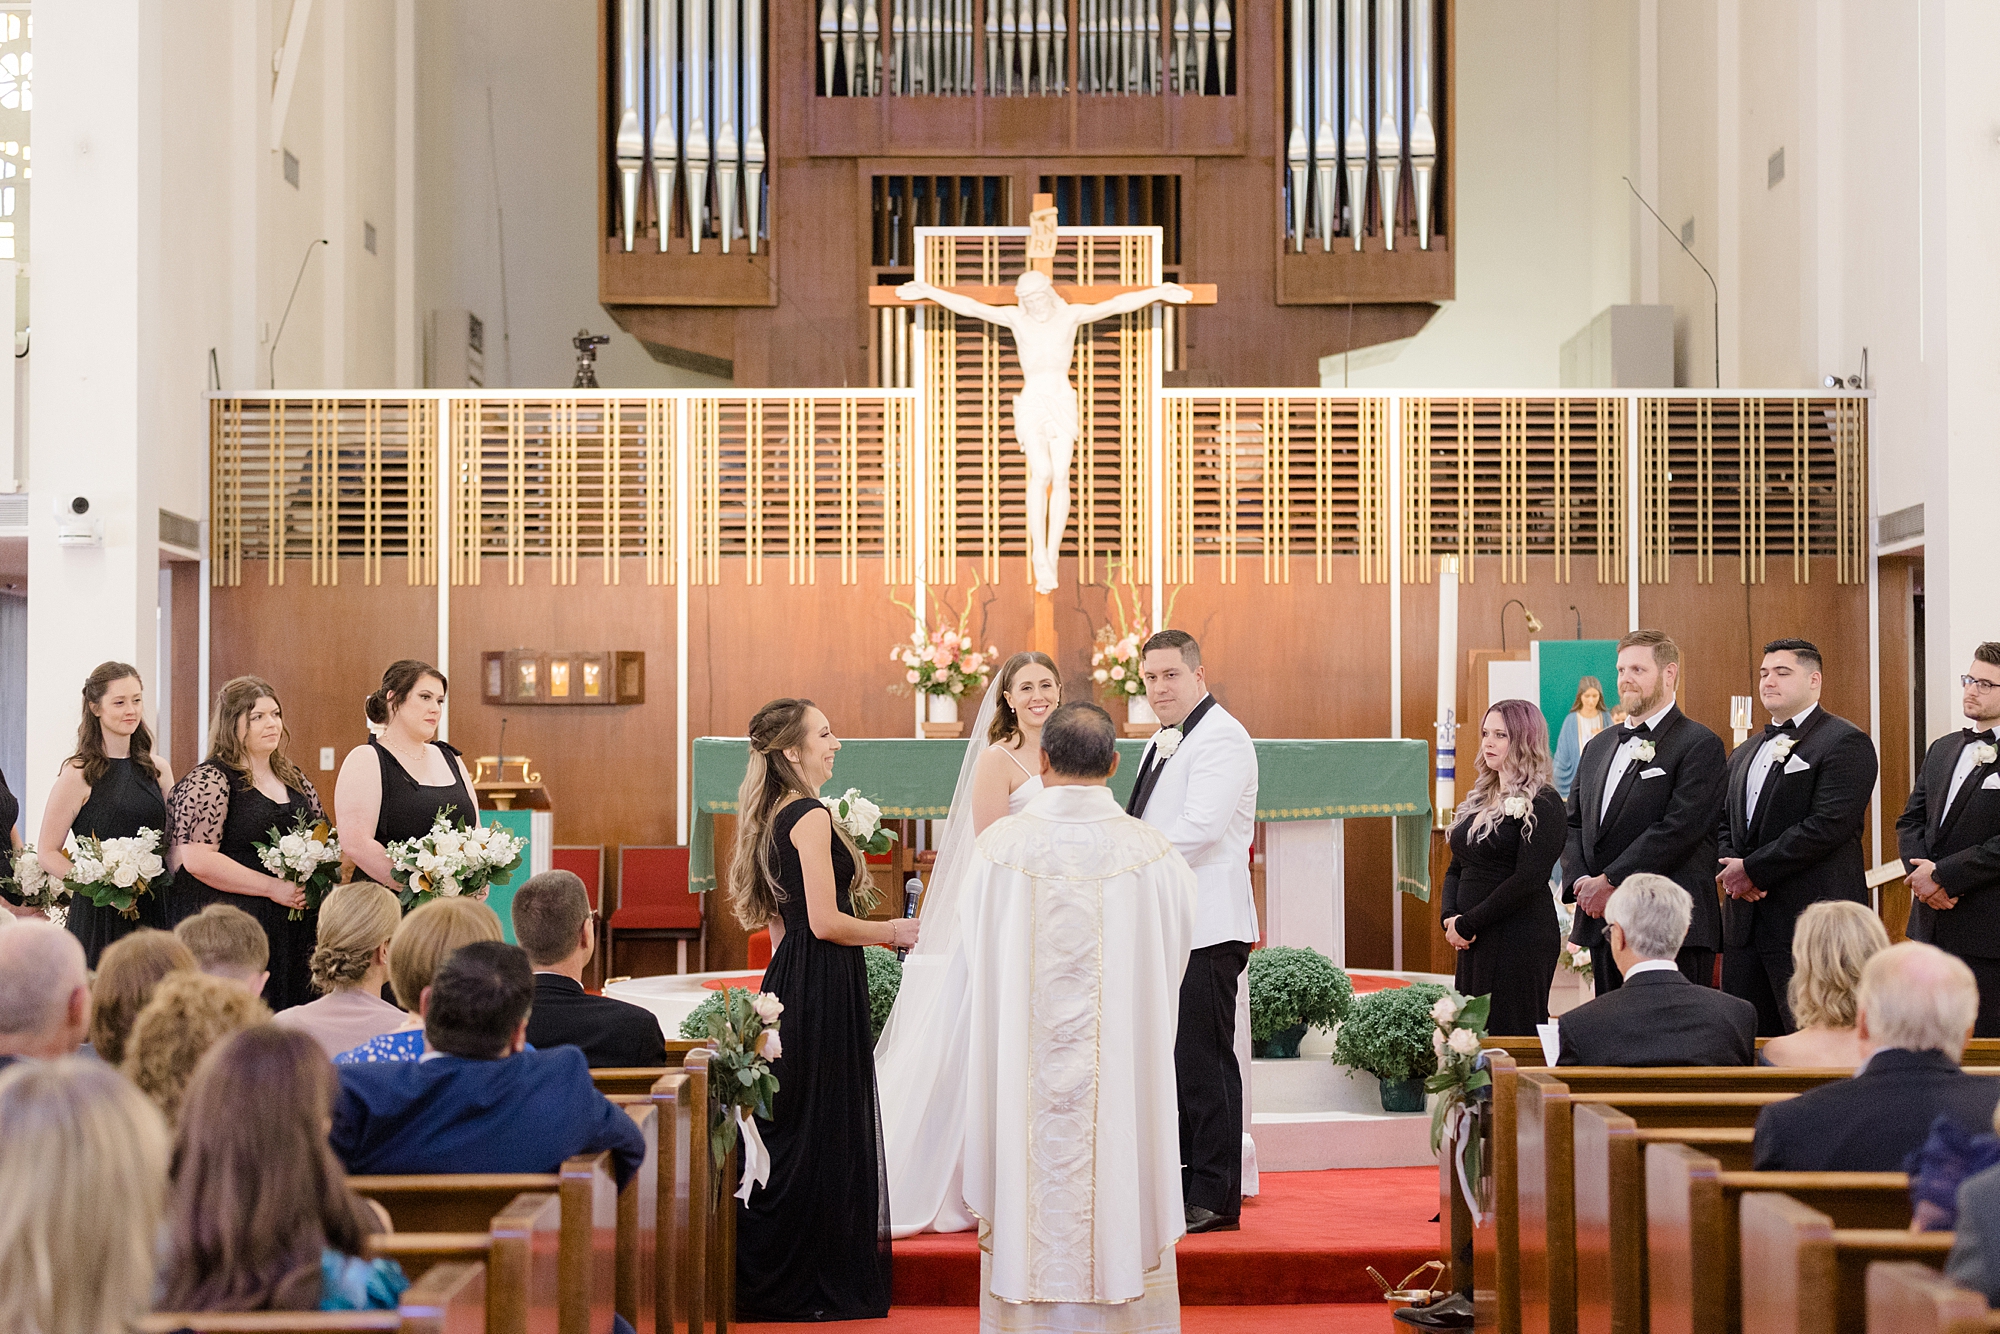 father officiates ceremony in front of couple at alter in Holy Family Catholic Church